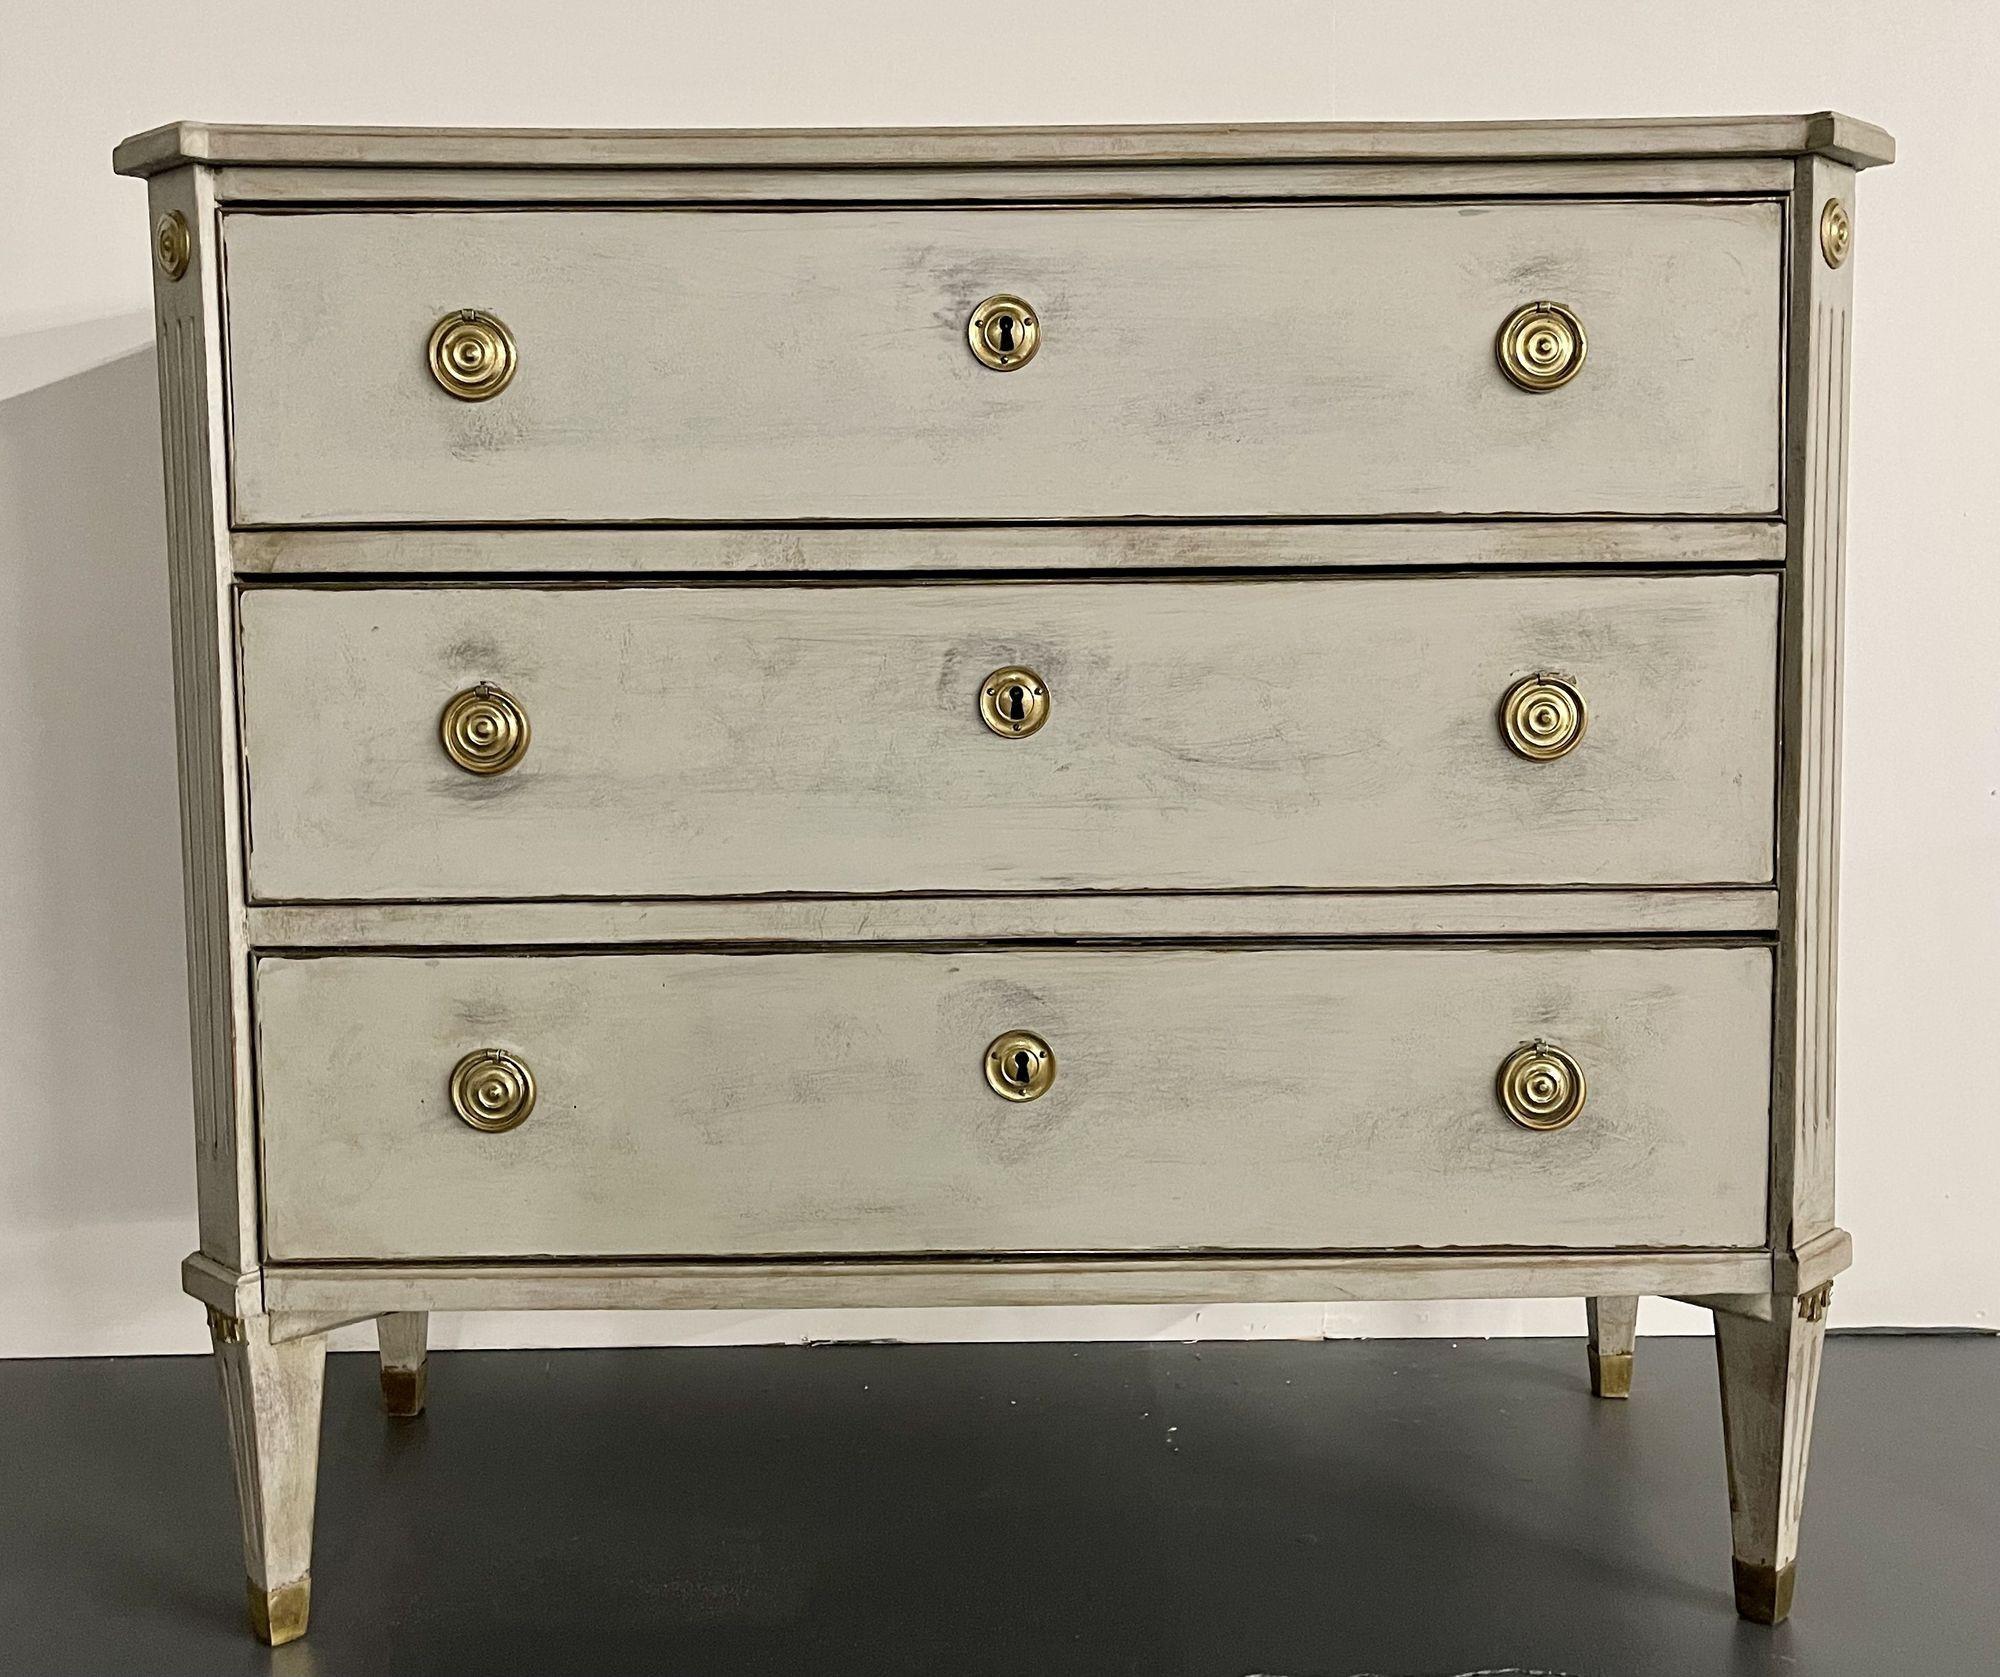 Swedish paint decorated Gustavian chest / commode or bedside table.
 
Part of our newly arrived large collection of Swedish Antique chests and commodes or bedside stands, selling at wholesale pricing. This finely bronze mounted, 19th century chest